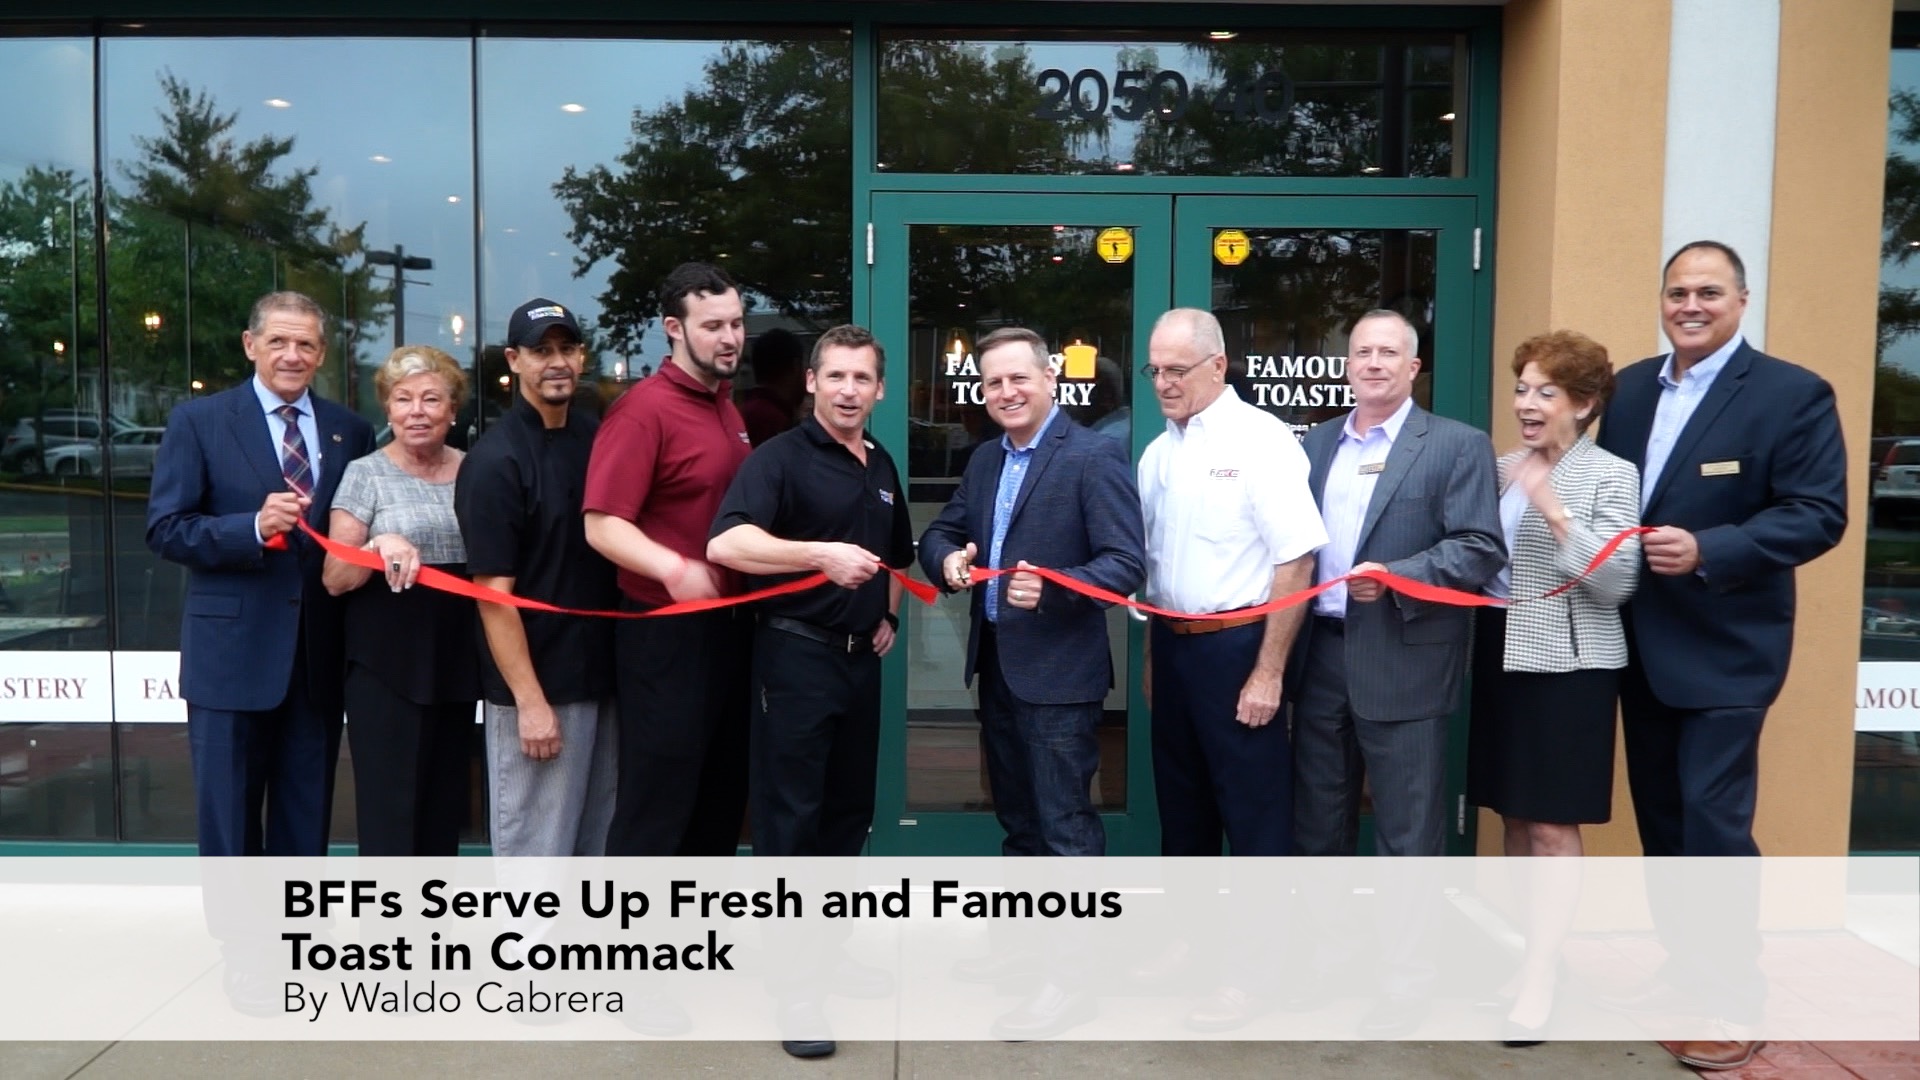 BFFs Serve Up Fresh and Famous Toast in Commack